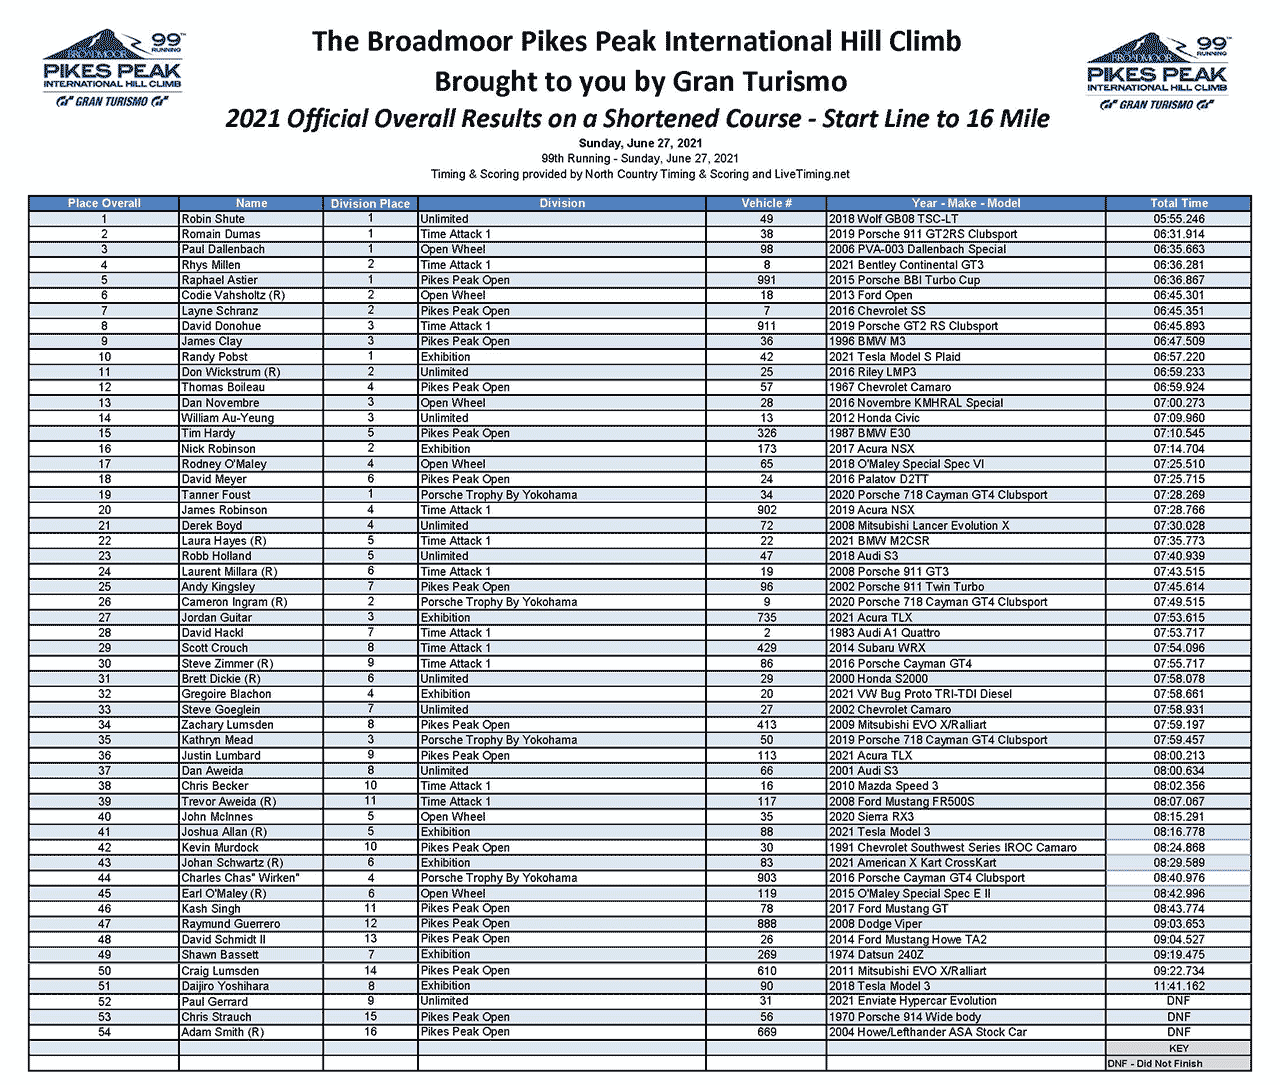 Overall results of the 2021 Pikes Peak International Hill Climb final run.